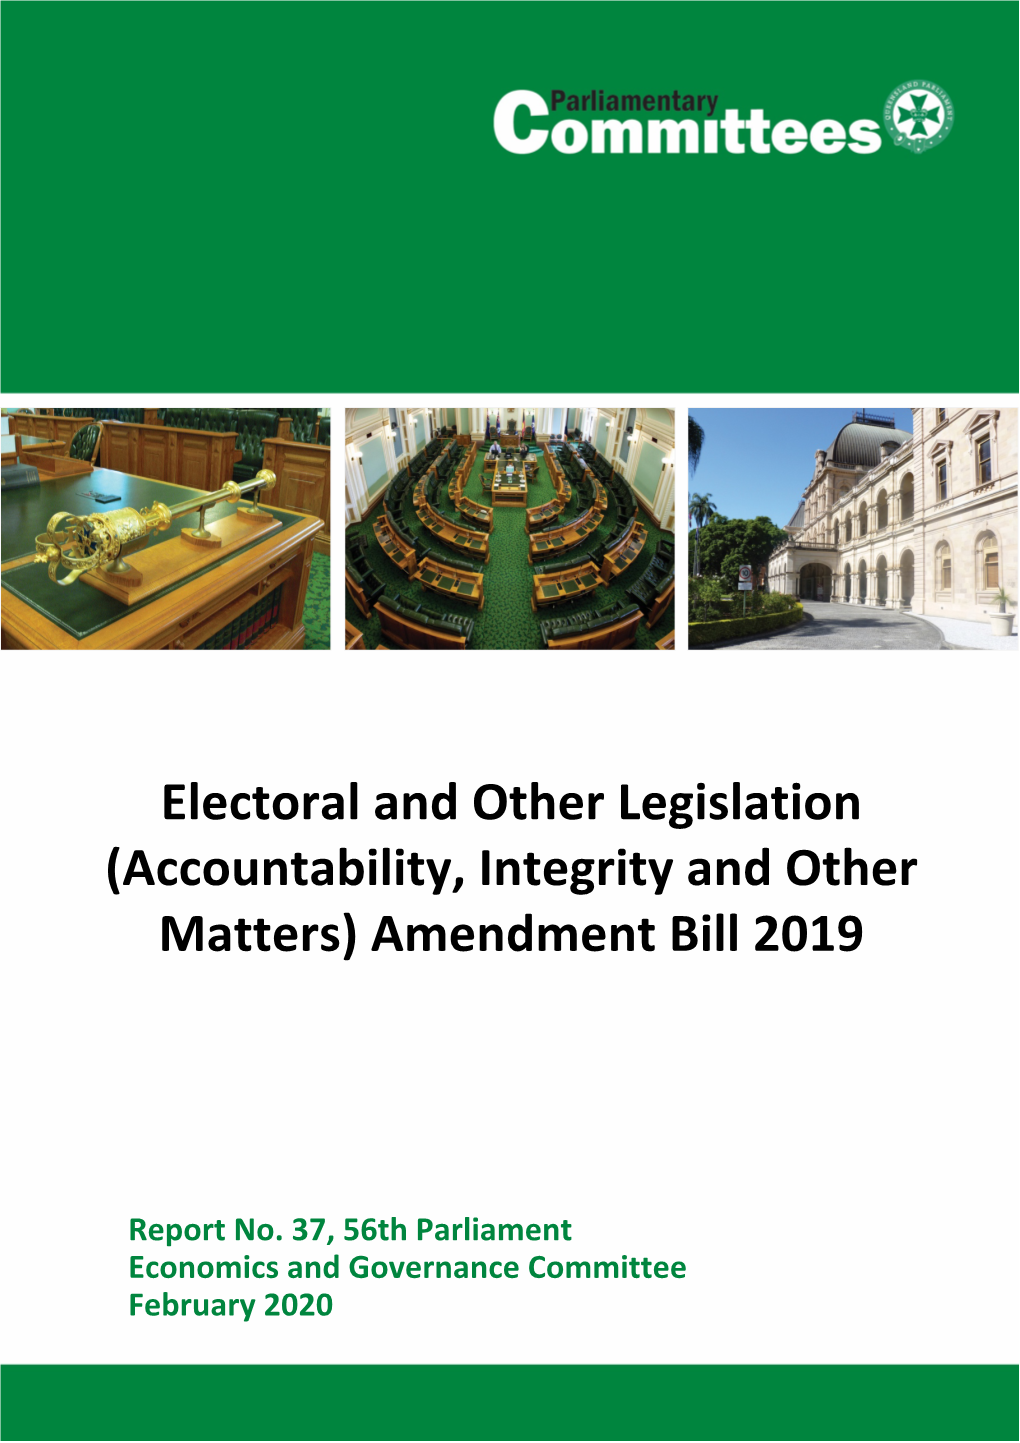 (Accountability, Integrity and Other Matters) Amendment Bill 2019